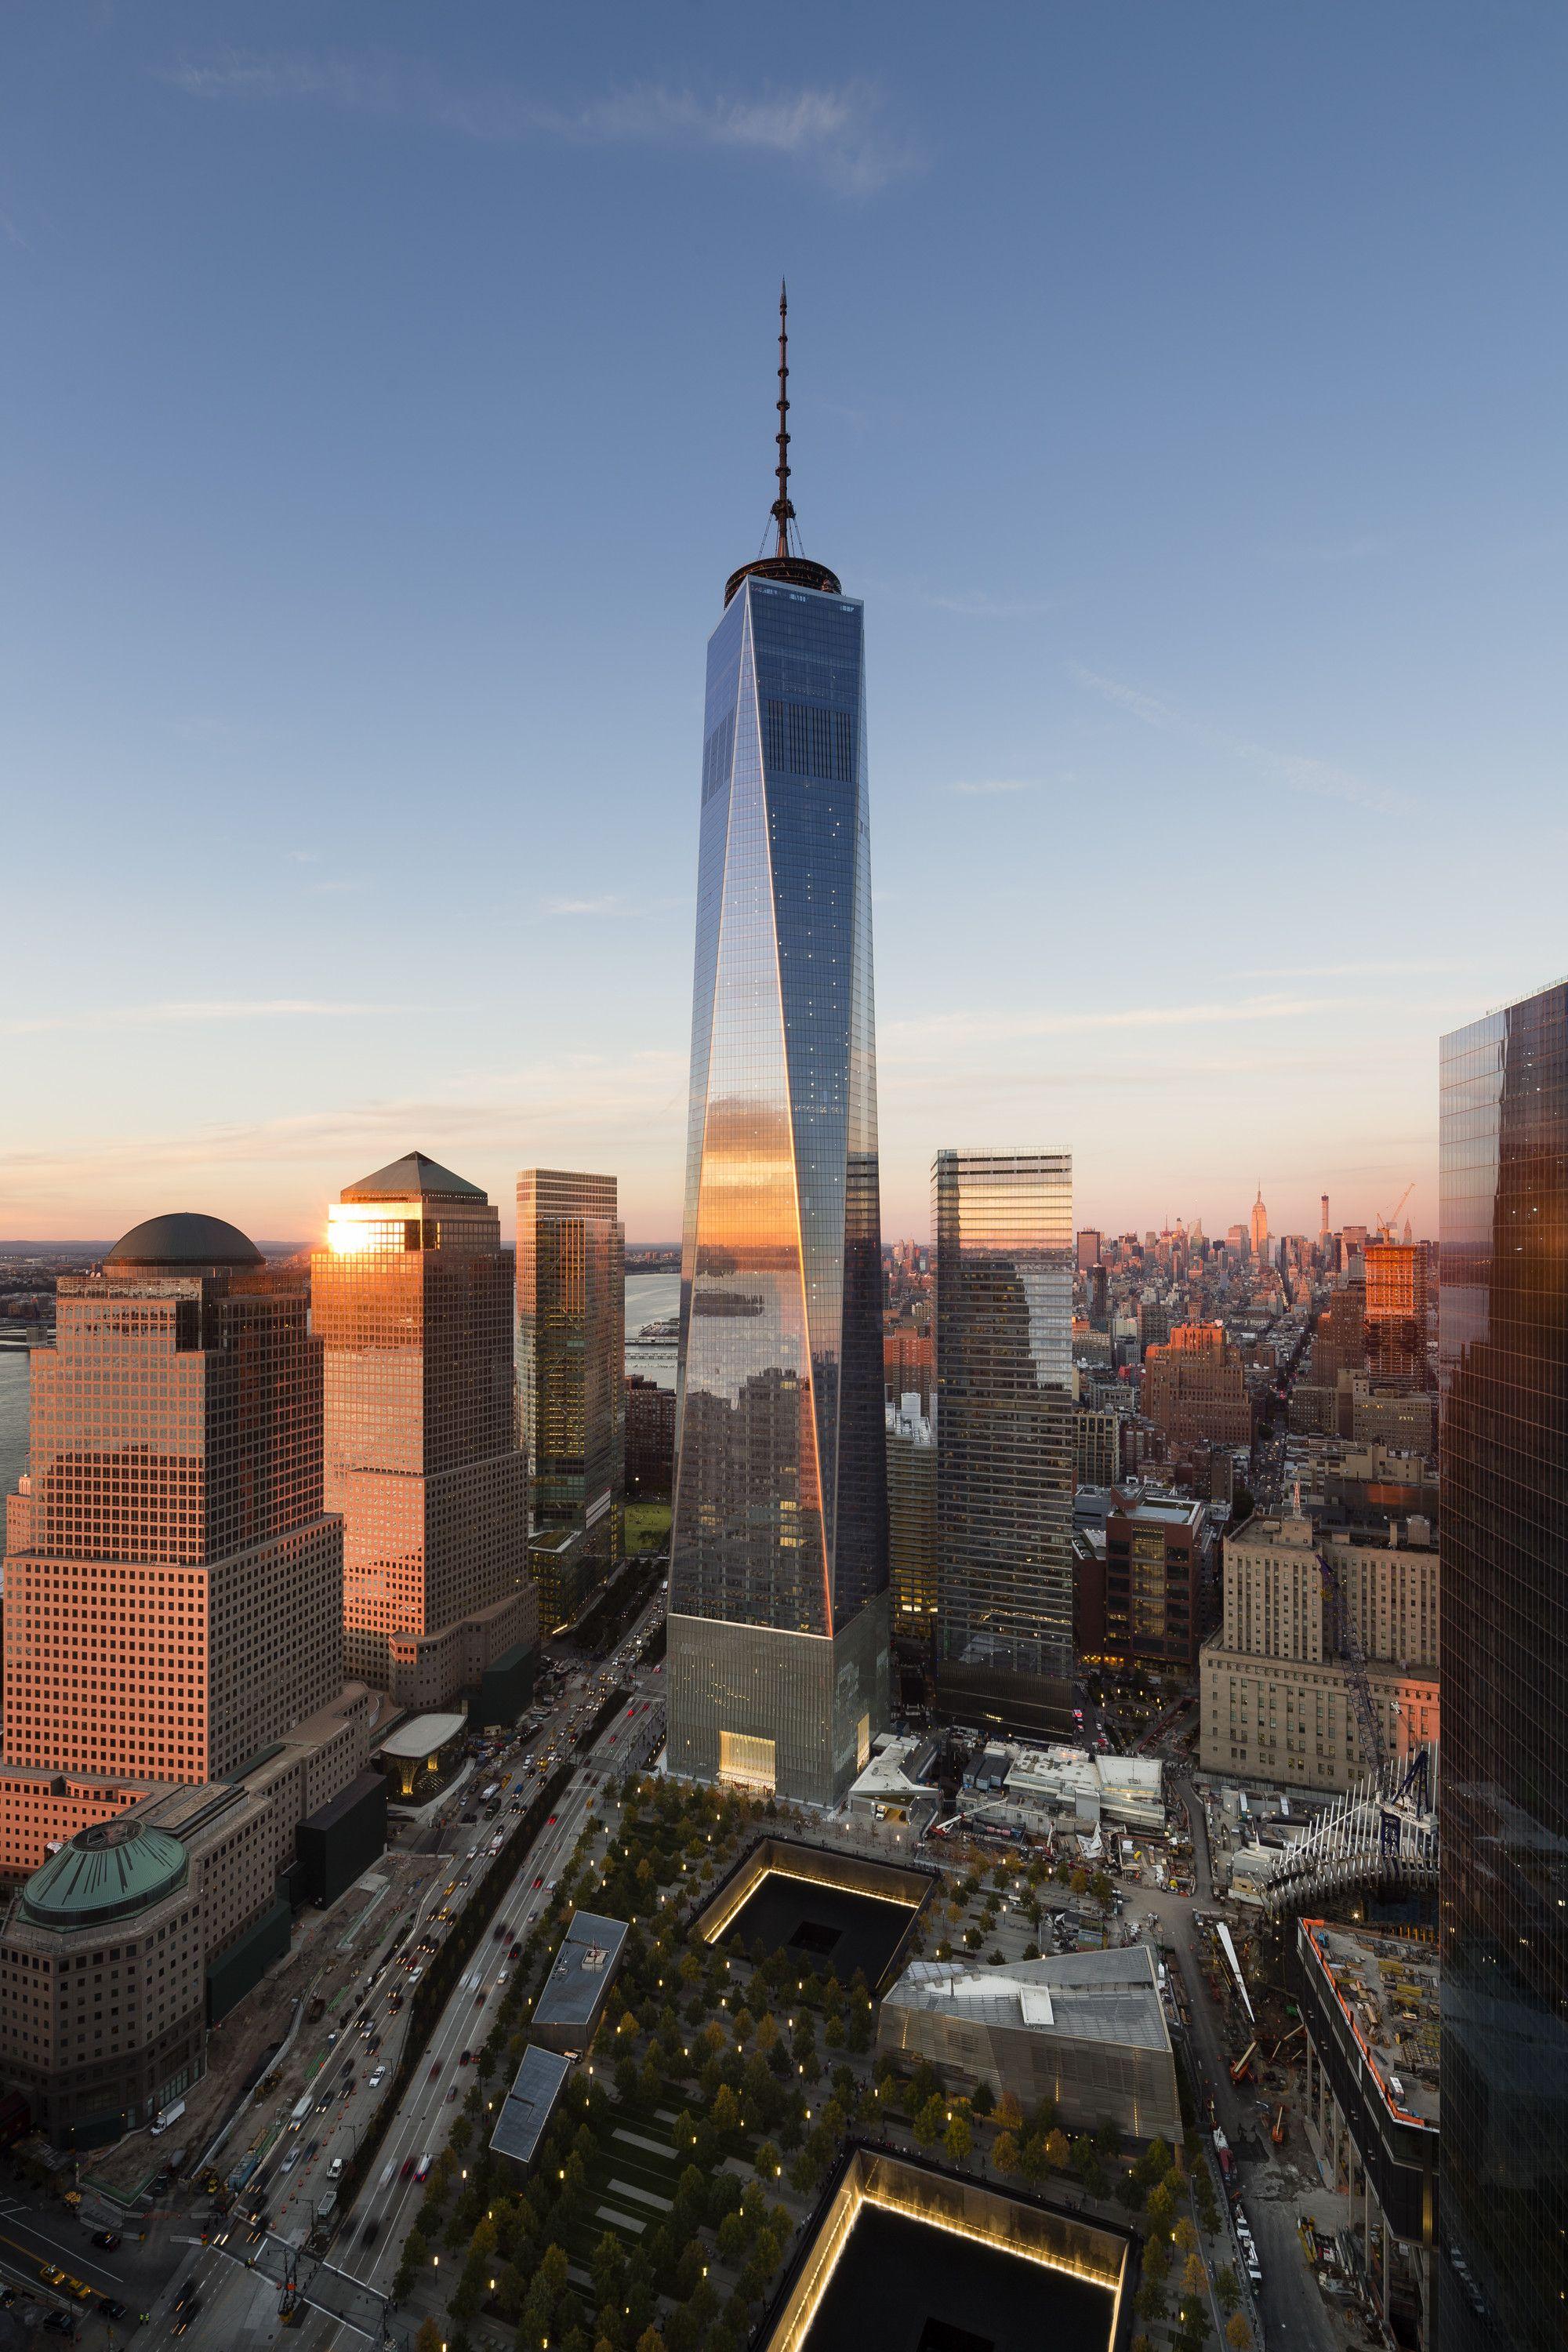 Gallery of Image of SOM's Completed One World Trade Center in New